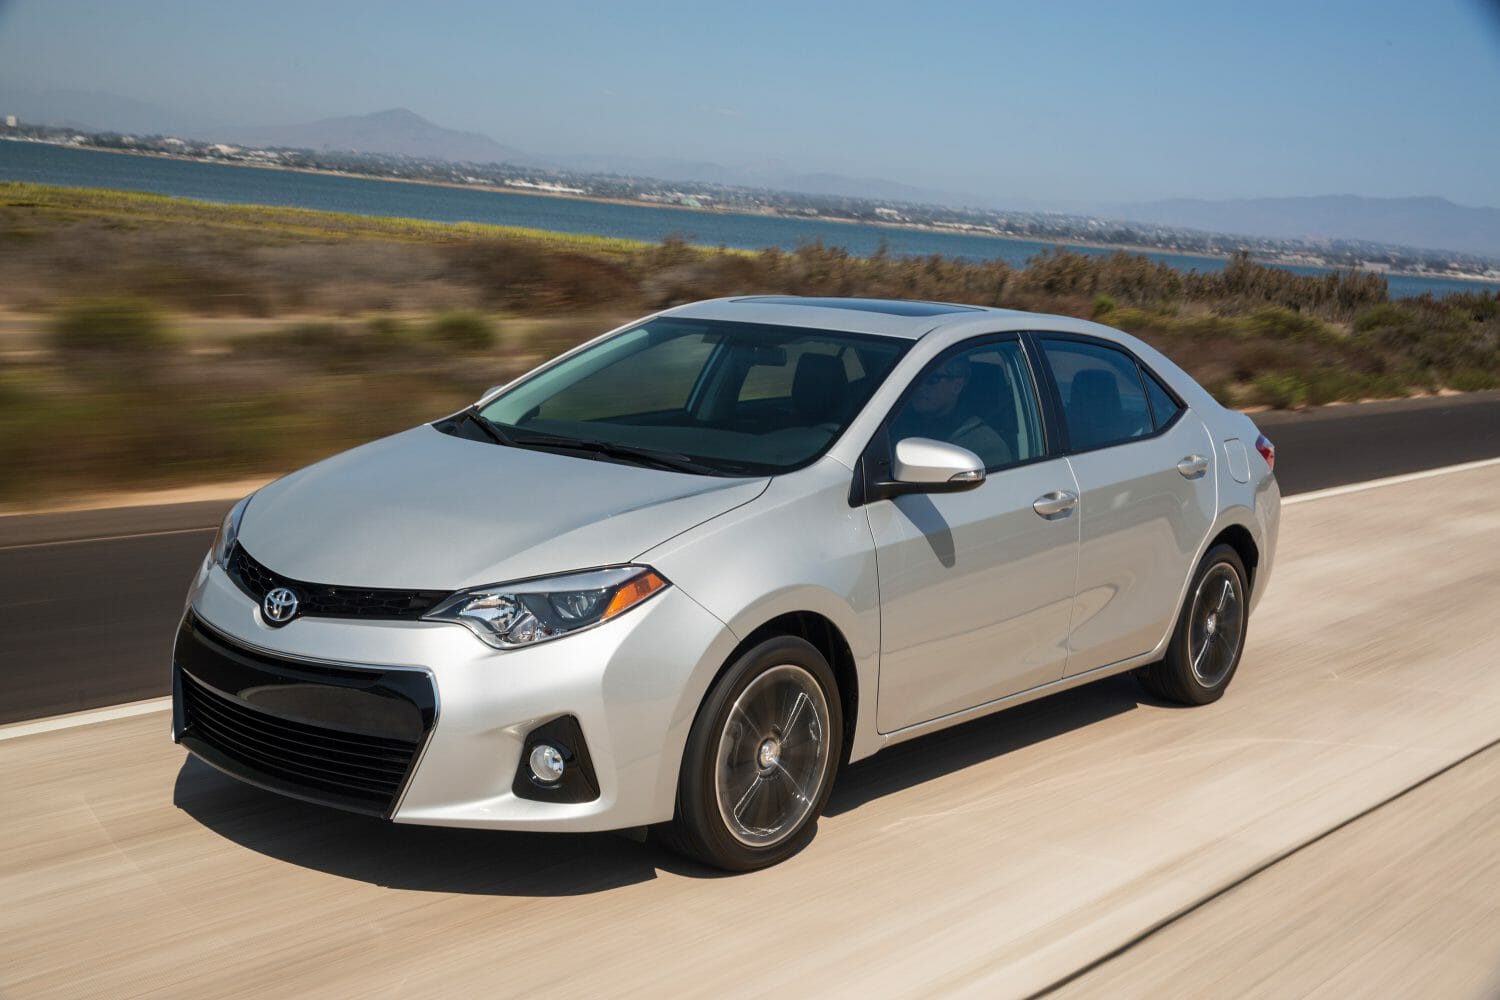 2015 Toyota Corolla Review: A No Nonsense, Fuel Efficient Compact Sedan  Built to Commute - VehicleHistory